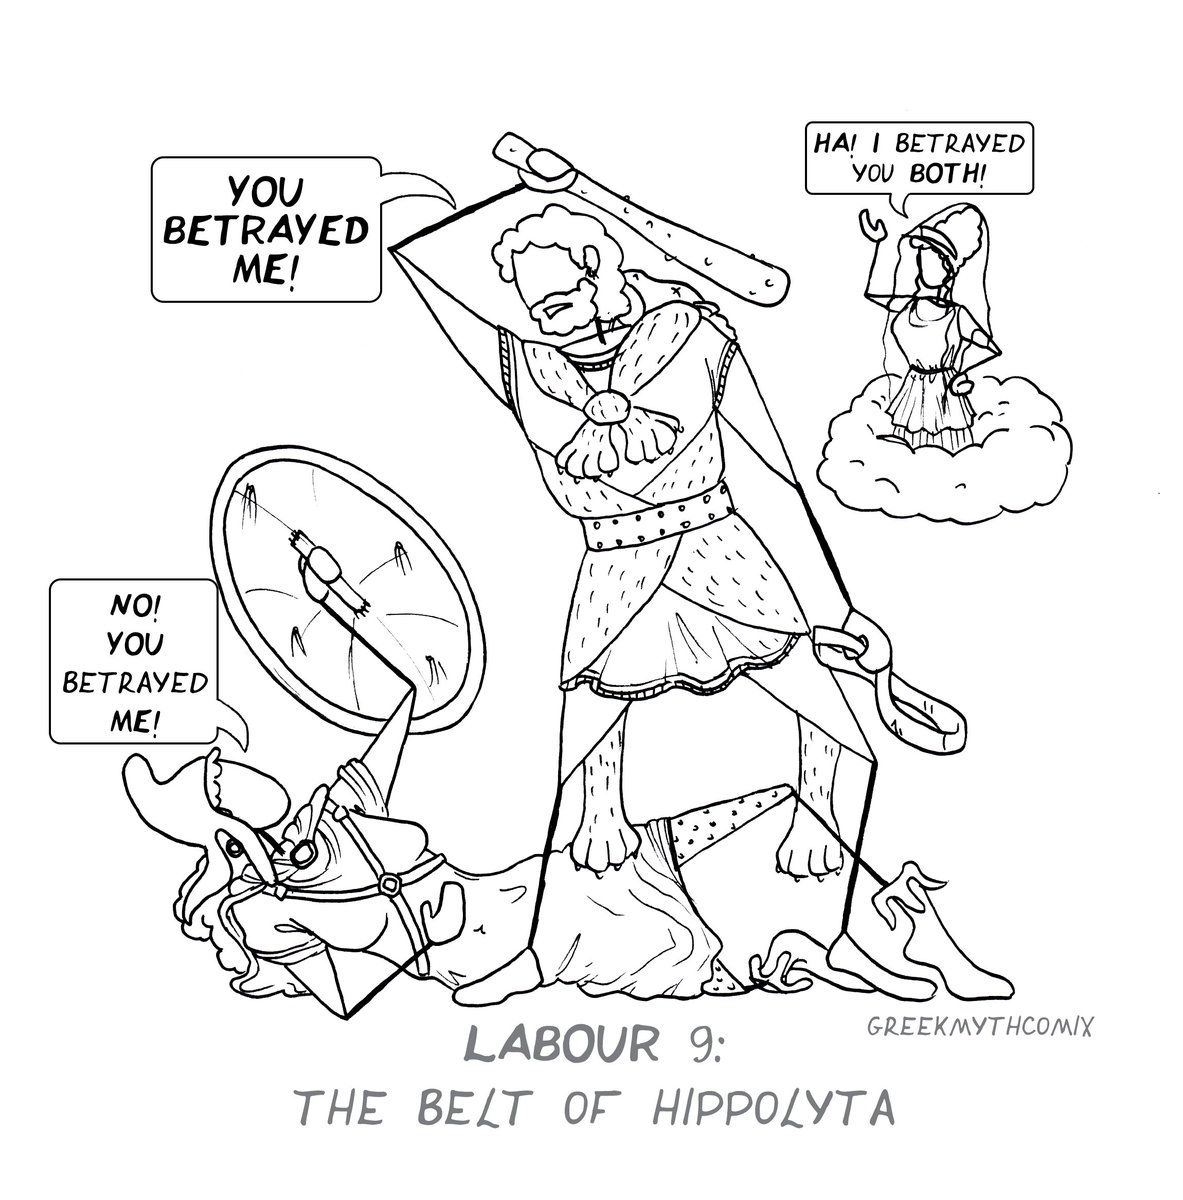 ✨Heracles’ ninth Labour: the Belt of Hippolyta ✨

Read the post for the myth and the metope and GCSE revision using this illustration! 

greekmythcomix.com/2023/03/30/her…

#heracles #hercules #revision #mythcomix #classroomresources #gcseclassics